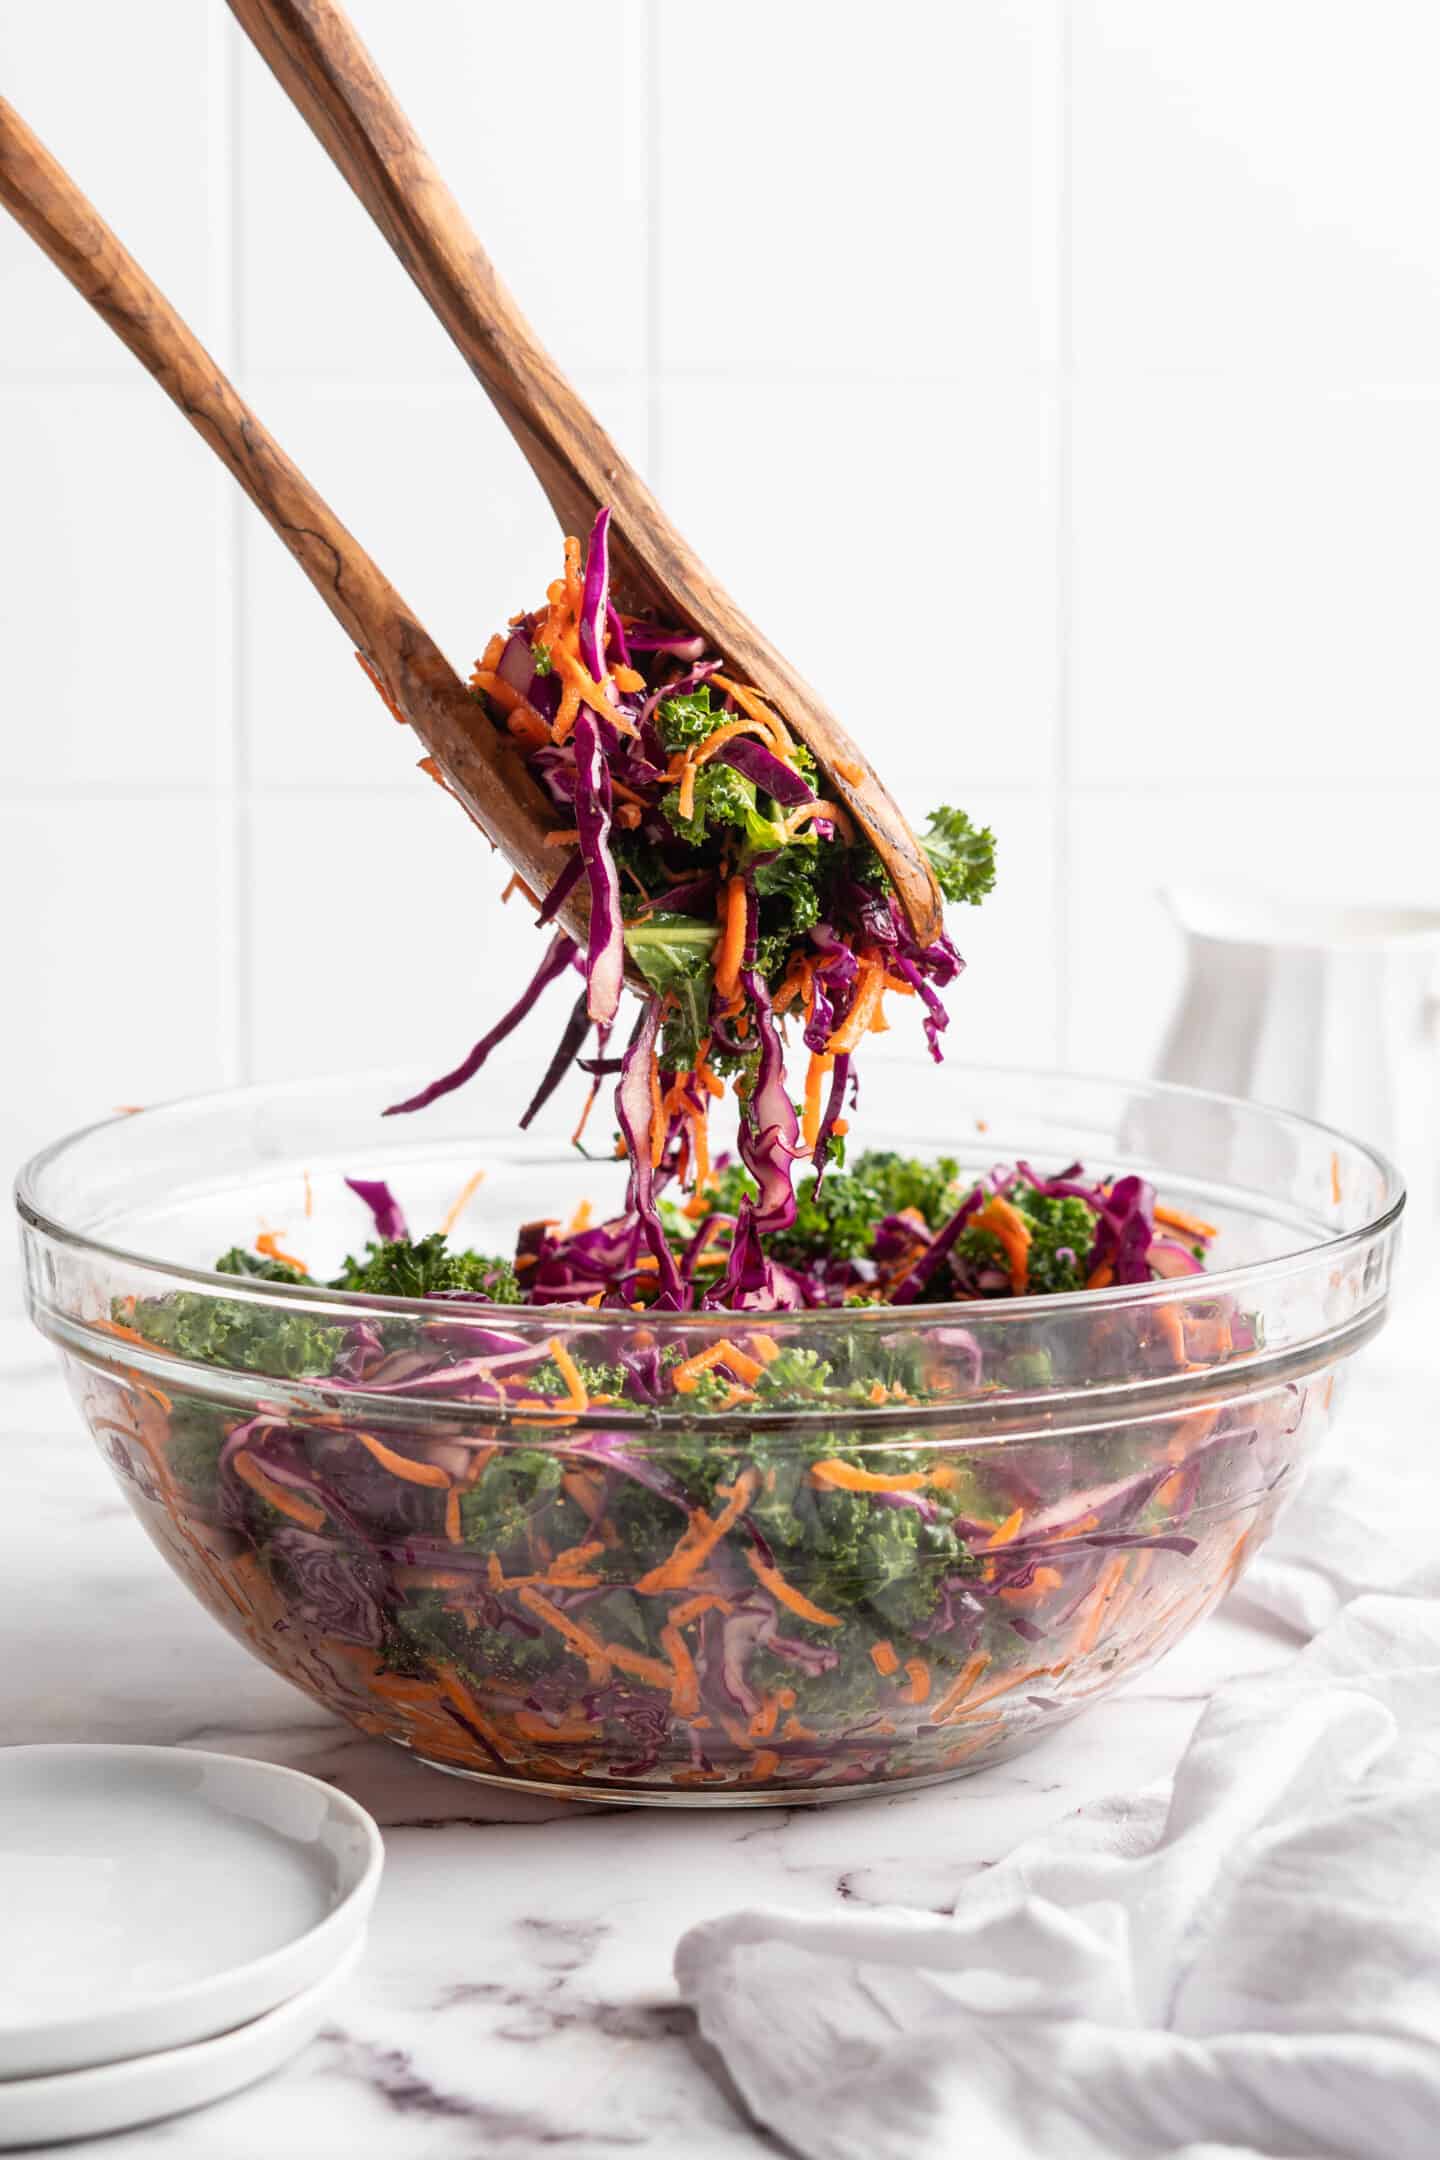 Salad tongs removing portion of no-mayo coleslaw from glass mixing bowl